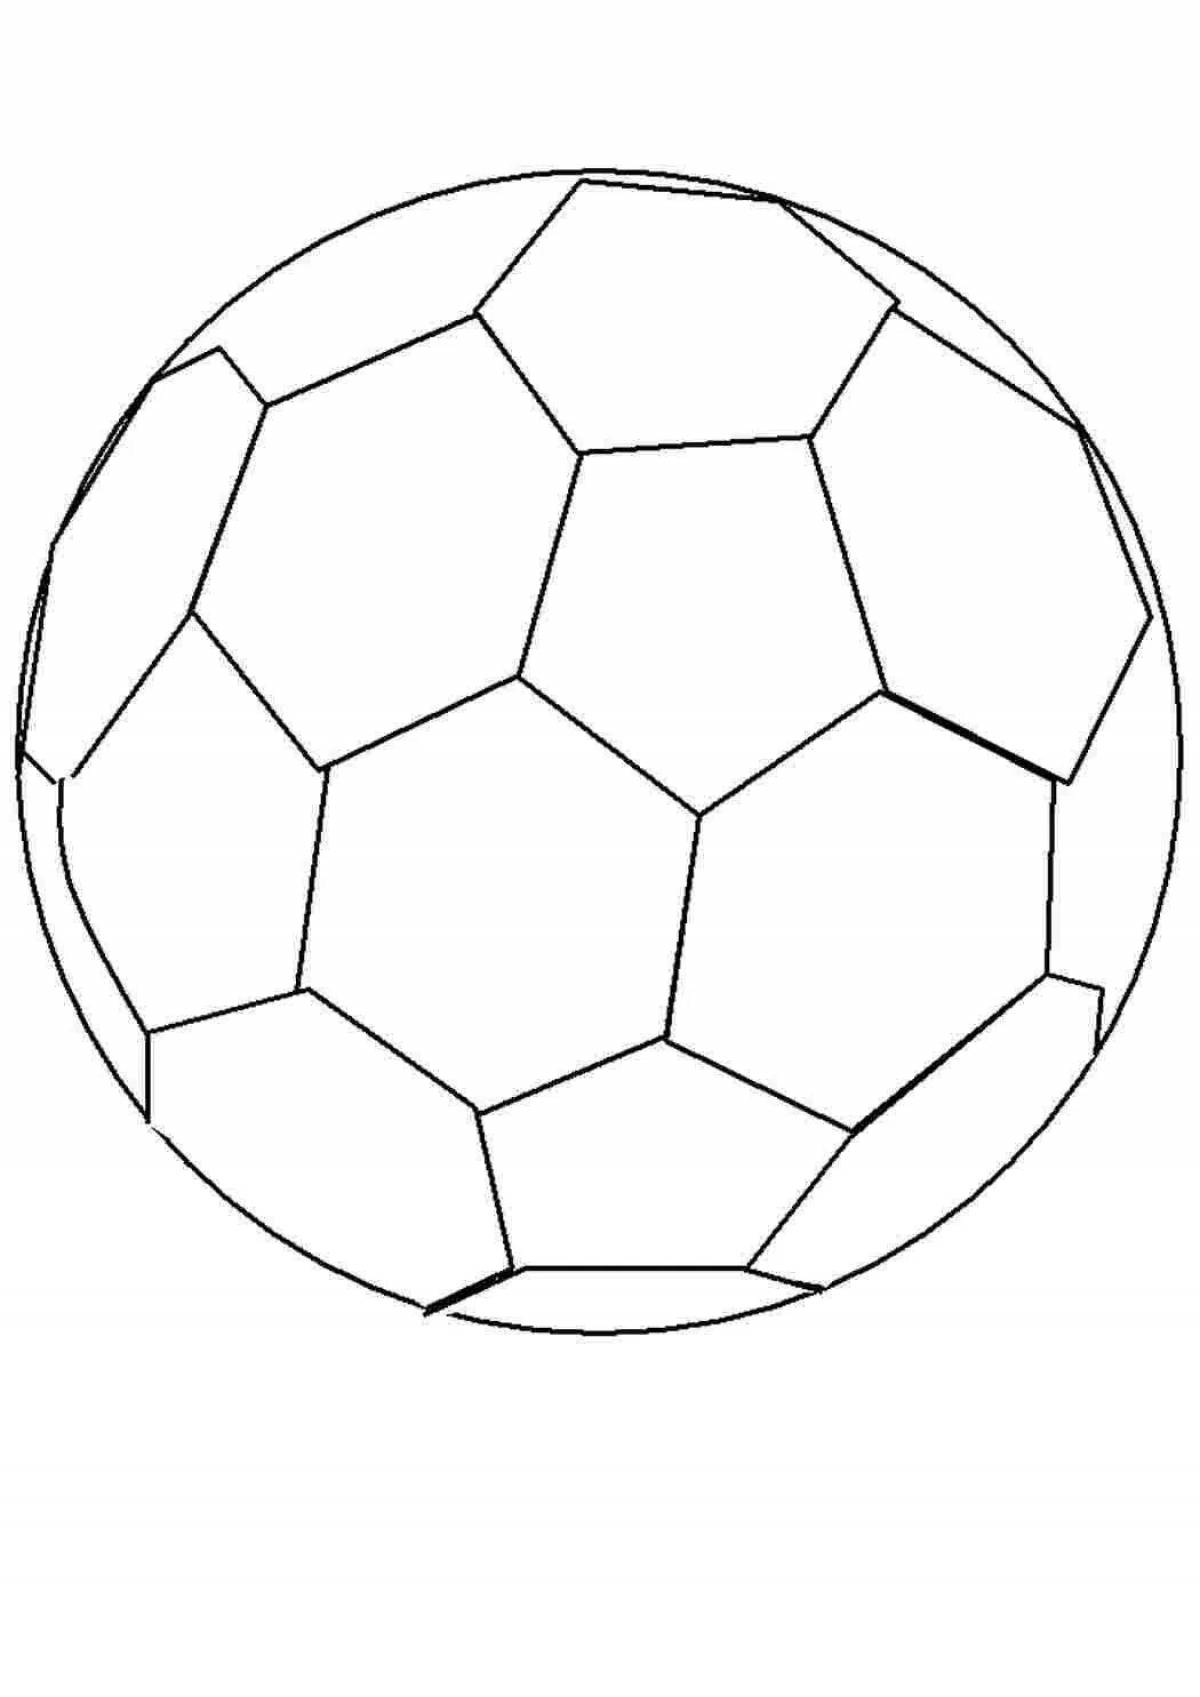 Colorful fun soccer ball coloring for kids